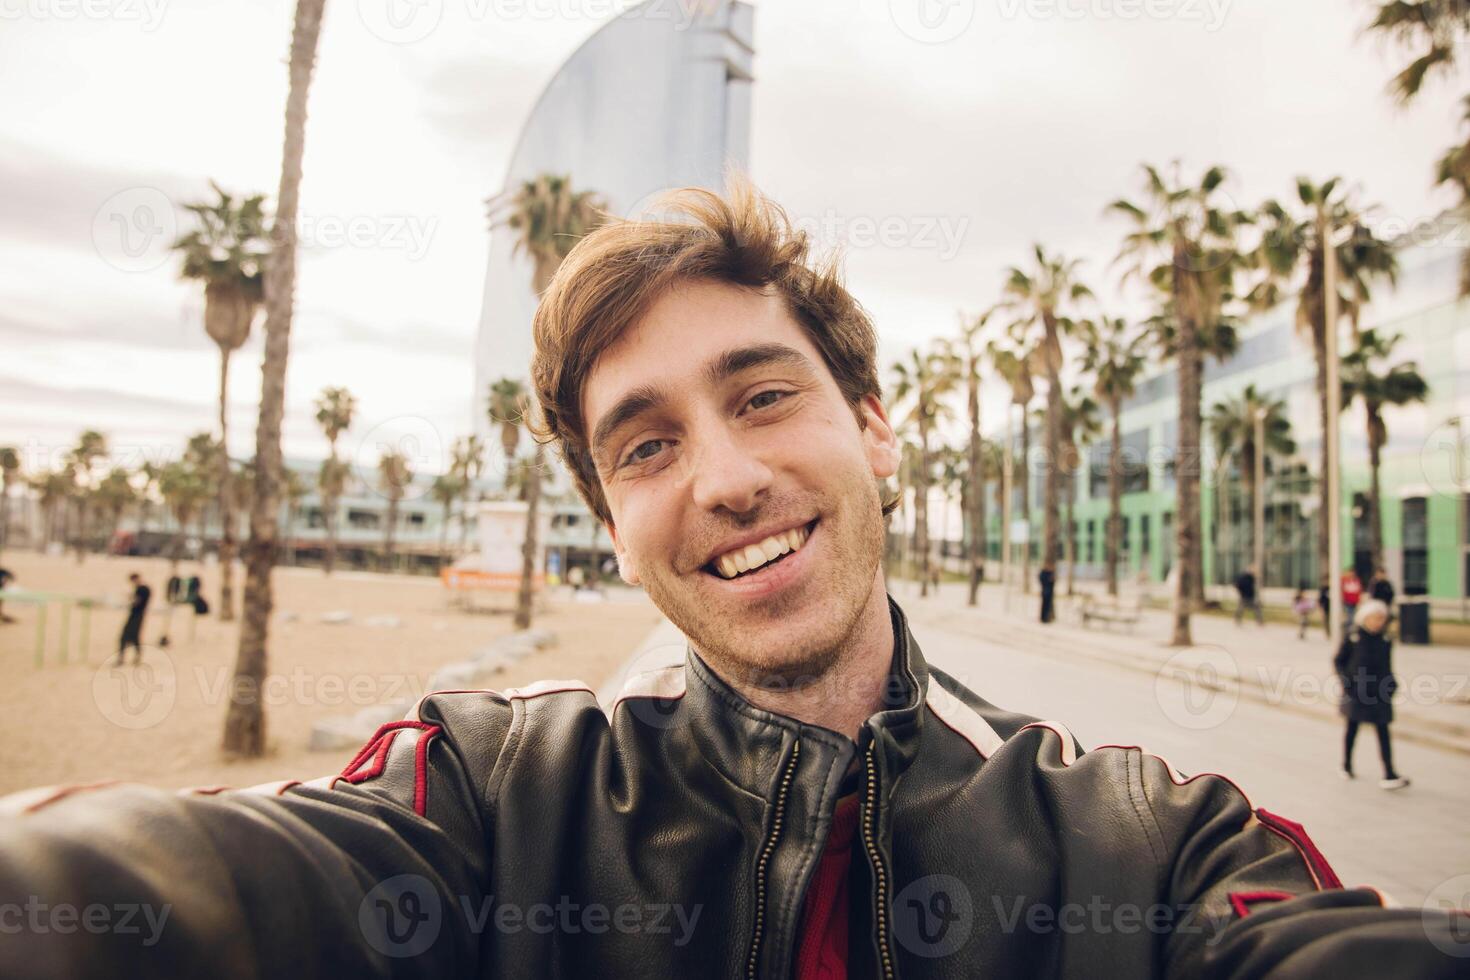 Young man taking a photo of himself